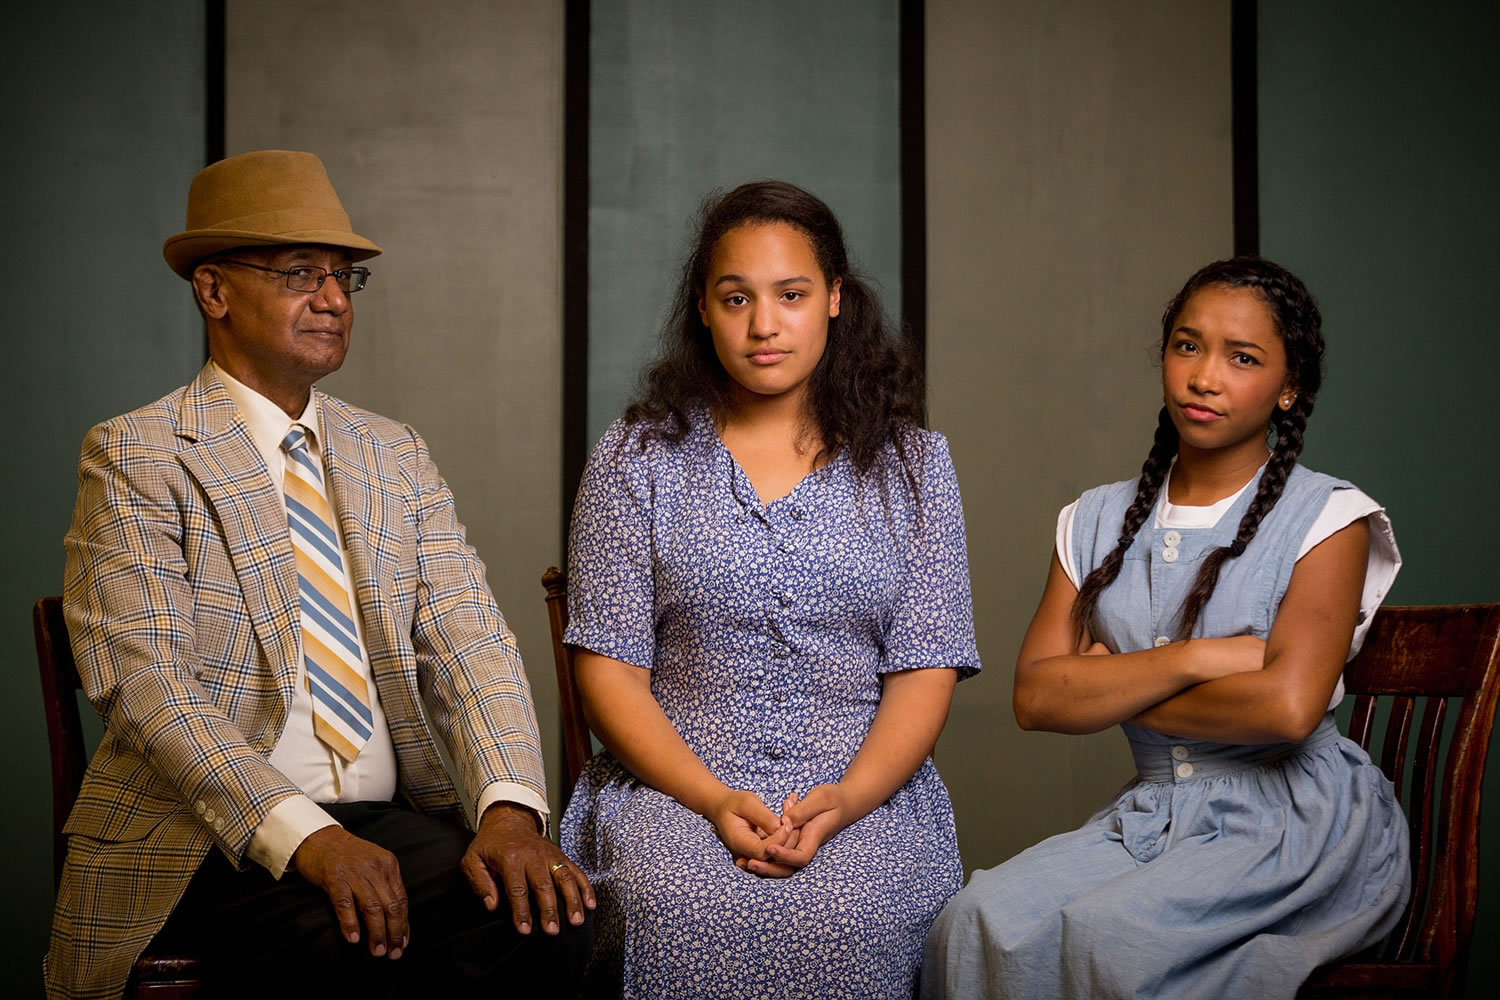 Philip Bowles, from left, Elena Mack and Kiara Gaulding are among the stars of &quot;Crumbs From the Table of Joy.&quot; The show will be presented in August by Serendipity Players, which also wants to recruit 20 local teens for a free weeklong theater camp in conjunction with the play.